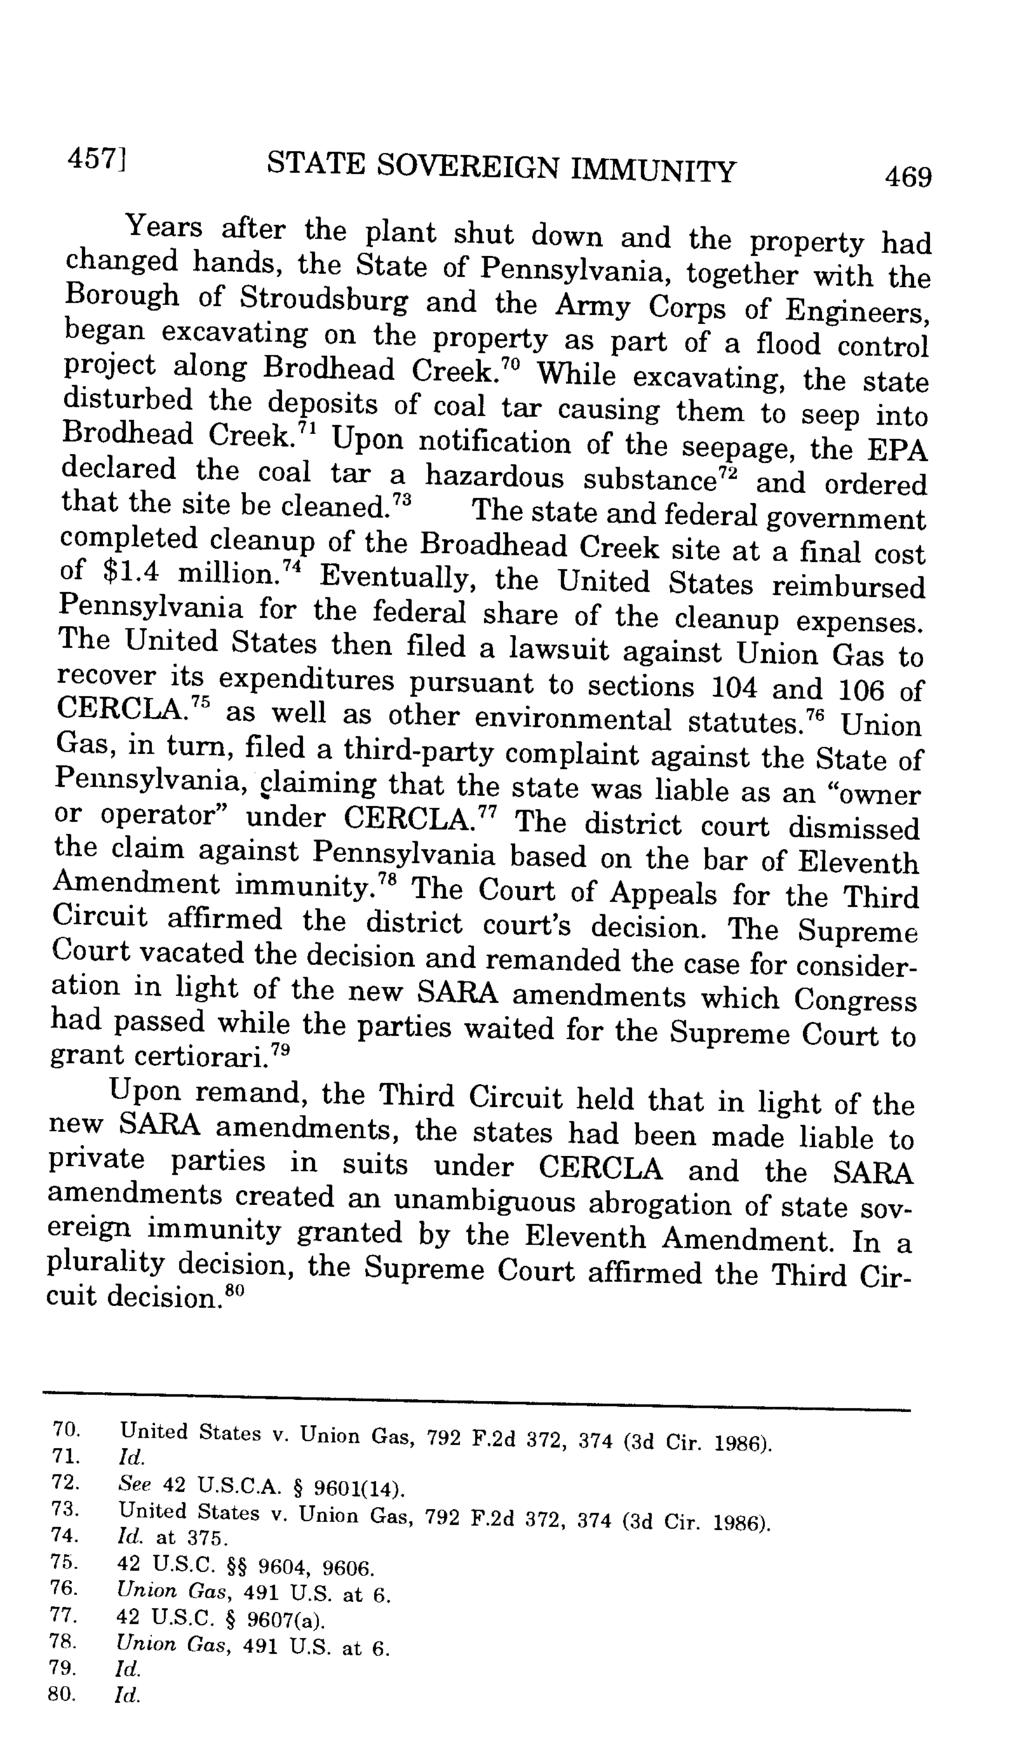 457] STATE SOVEREIGN IMMUNITY 469 Years after the plant shut down and the property had changed hands, the State of Pennsylvania, together with the Borough of Stroudsburg and the Army Corps of